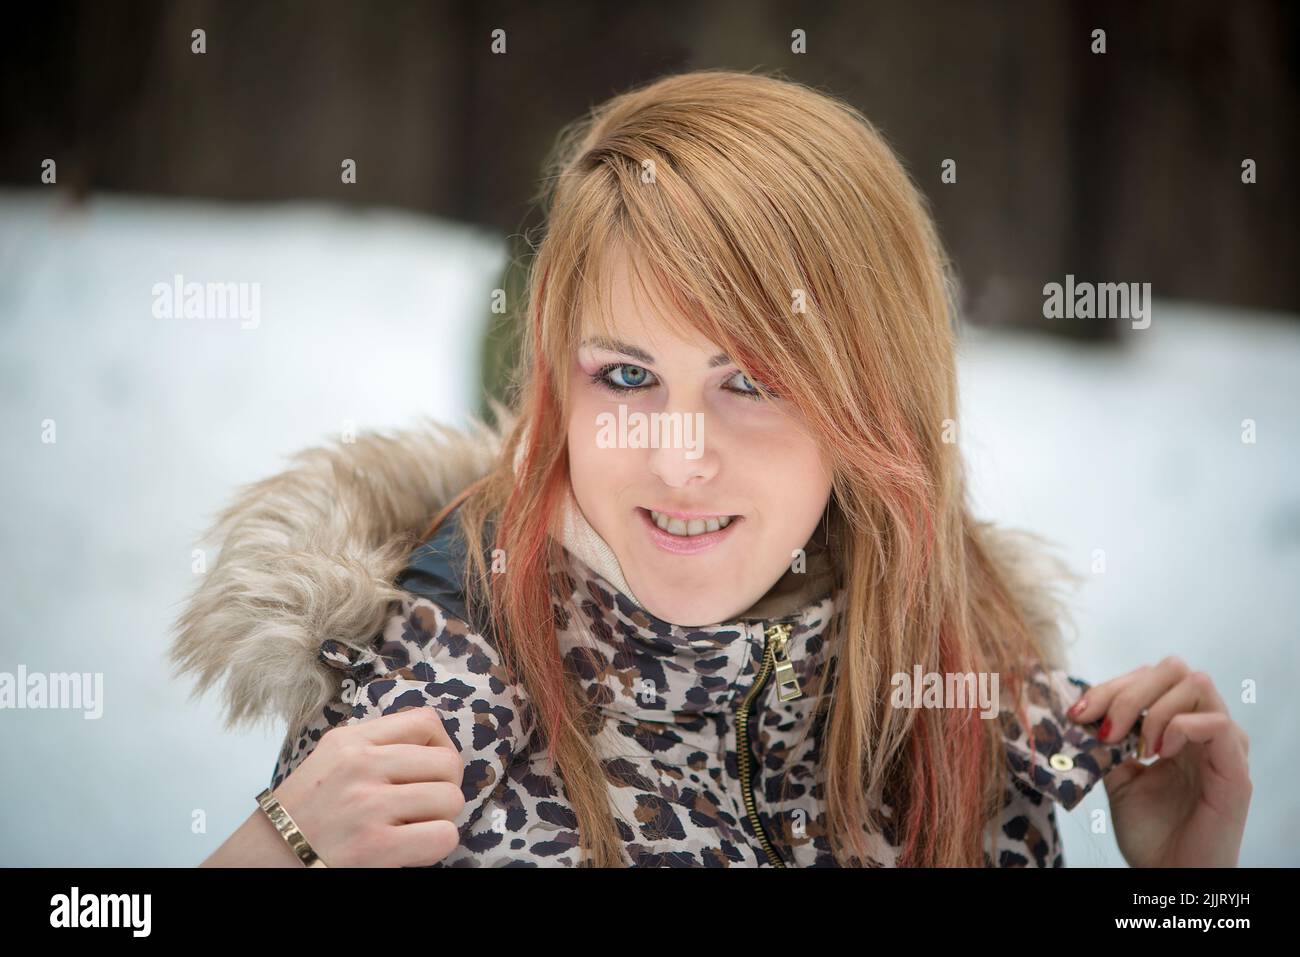 A portrait of a Caucasian blonde girl in a winter jacket with a blurred snoy background Stock Photo